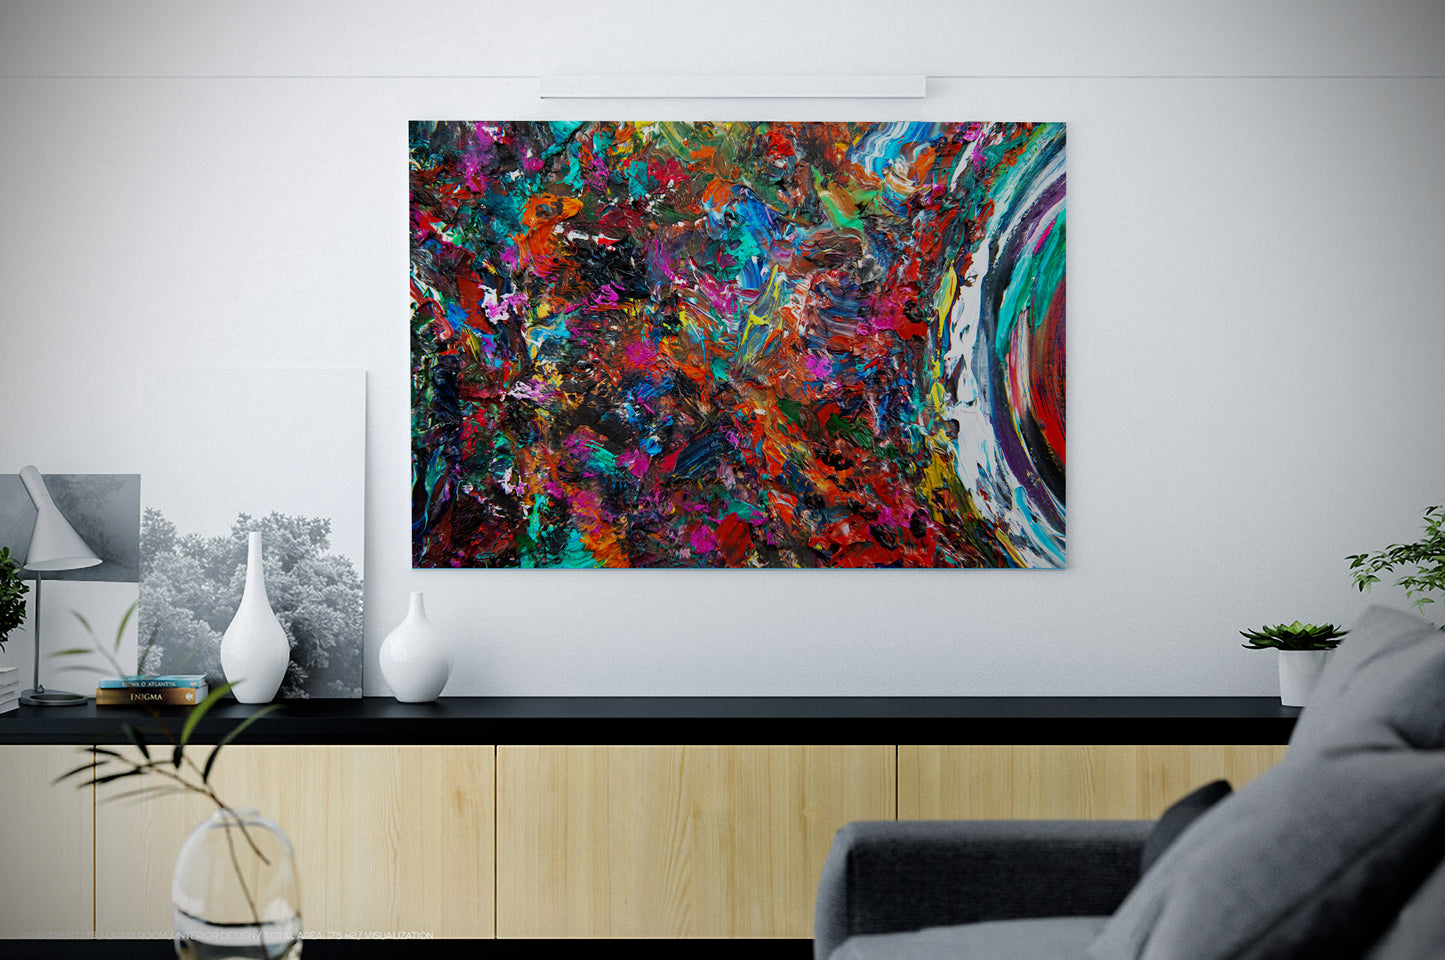 Vid-19 Saturn Ejection abstract art by Doug LaRue